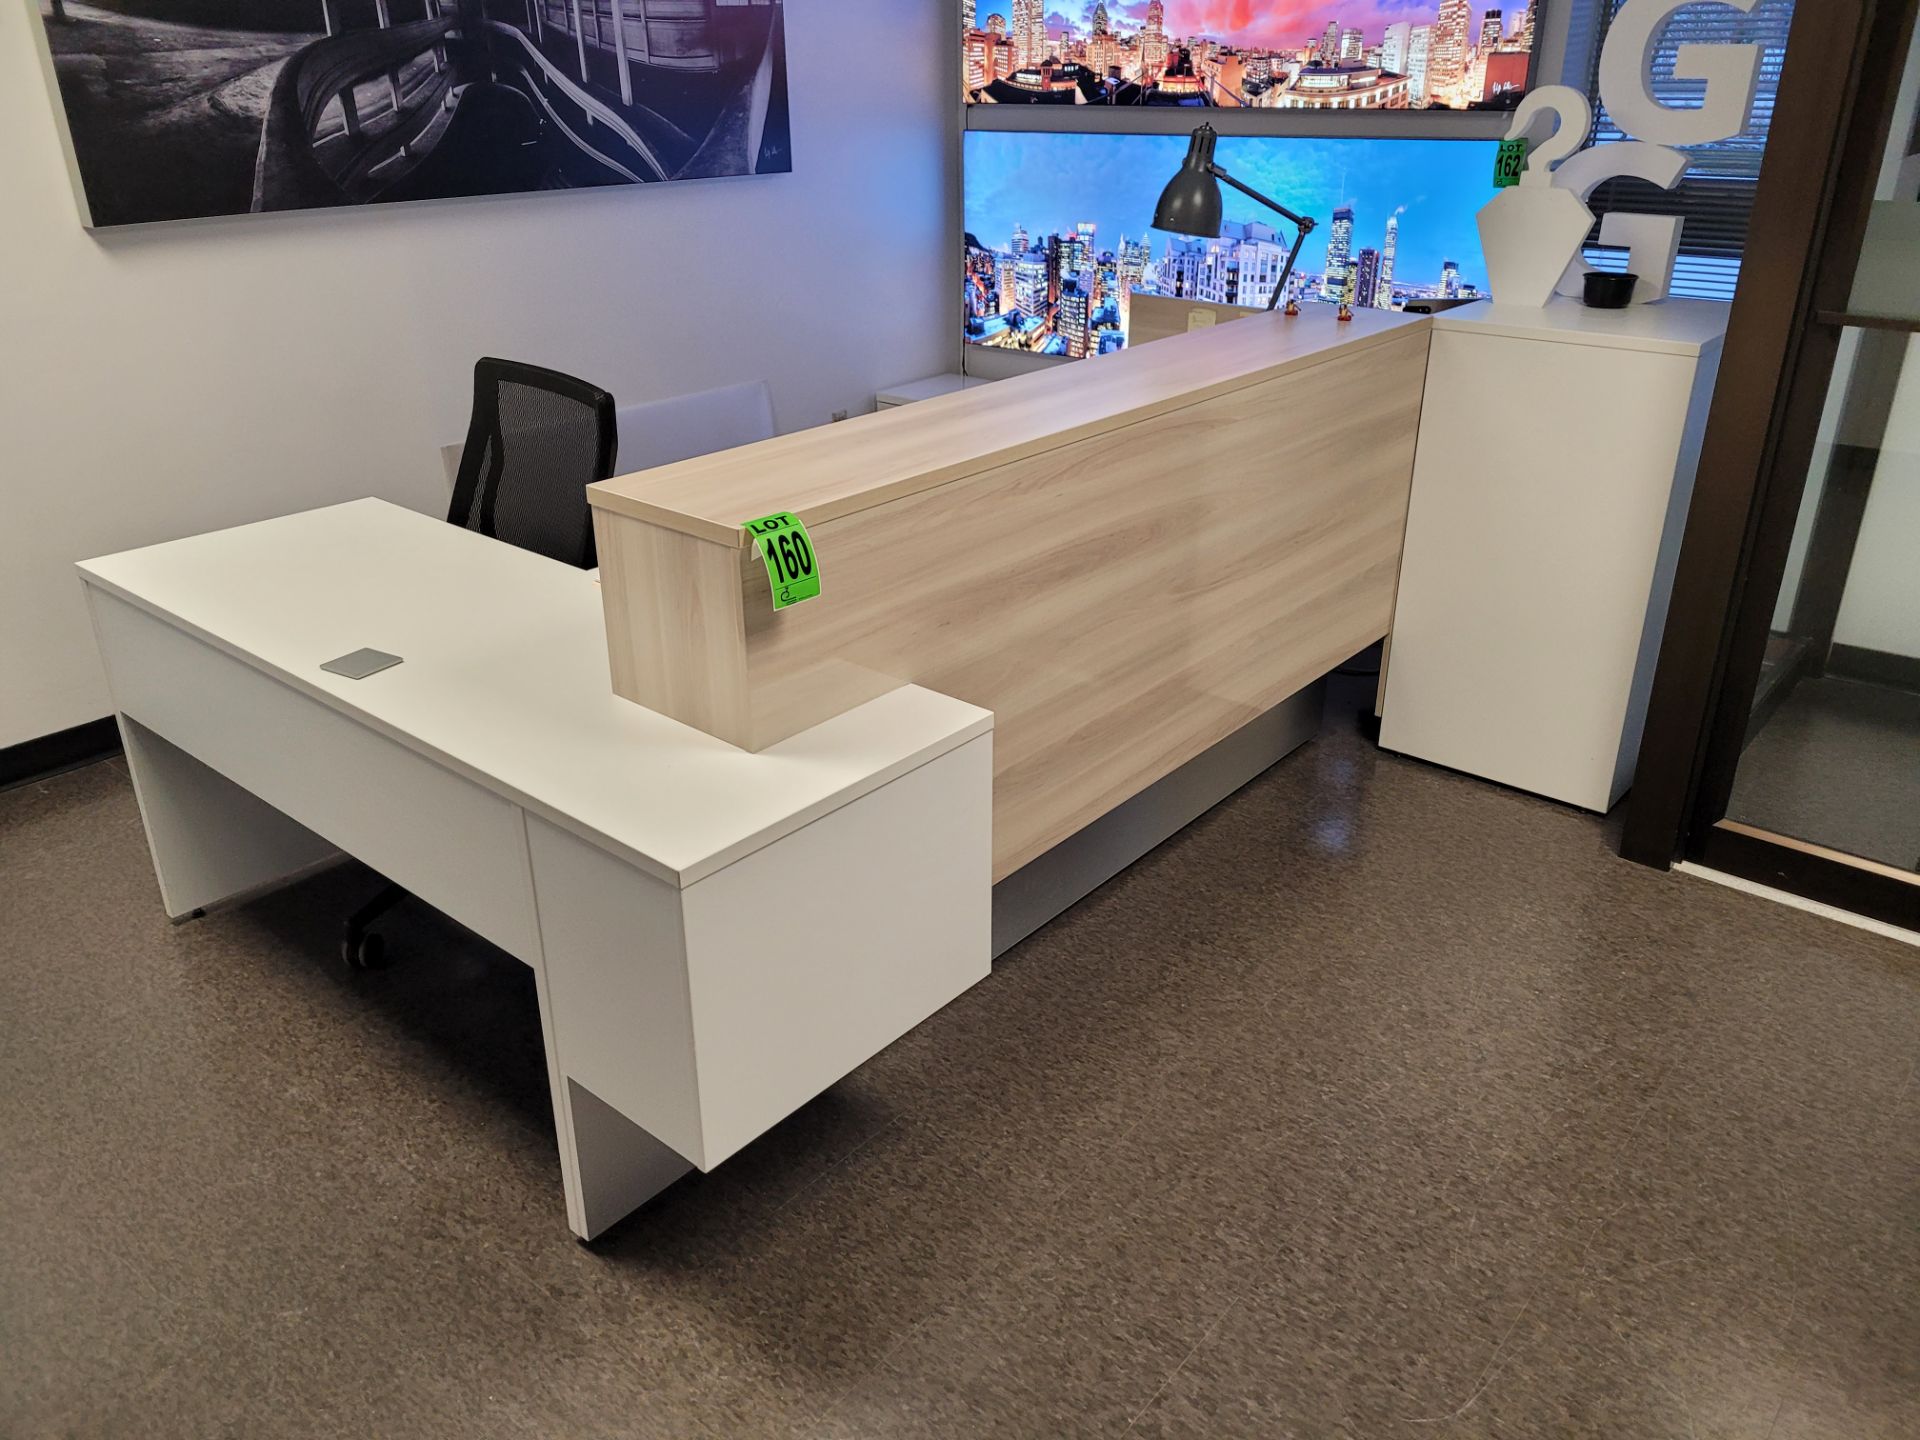 Lot of reception desk and furniture including reception desk, high back rolling office chair, 3-draw